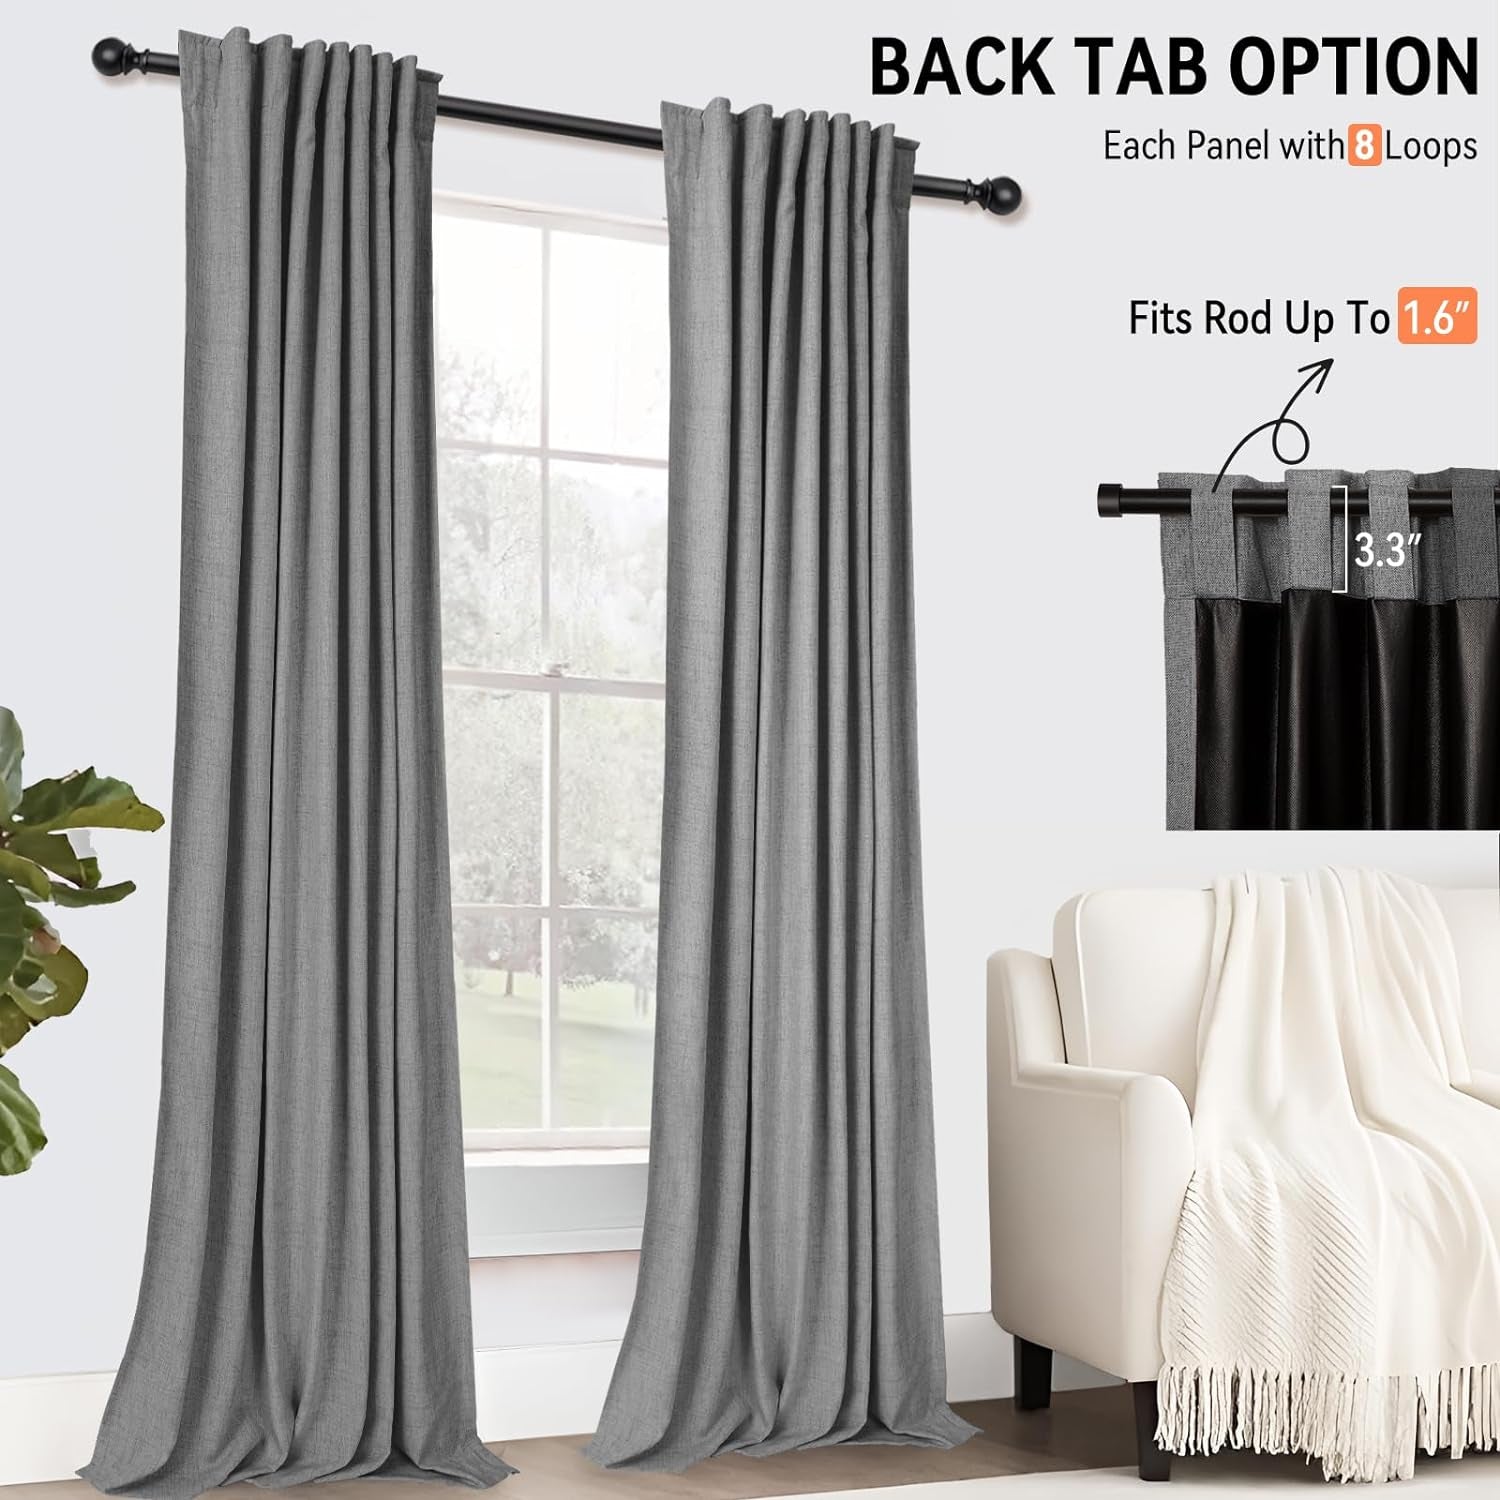 100% Blackout Shield Blackout Curtains for Bedroom Faux Linen Black Out Curtains 84 Inch Length 2 Panels Set, Back Tab/Rod Pocket Thermal Insulated Curtains with Black Liner, 50W X 84L, Dark Grey  100% Blackout Shield   